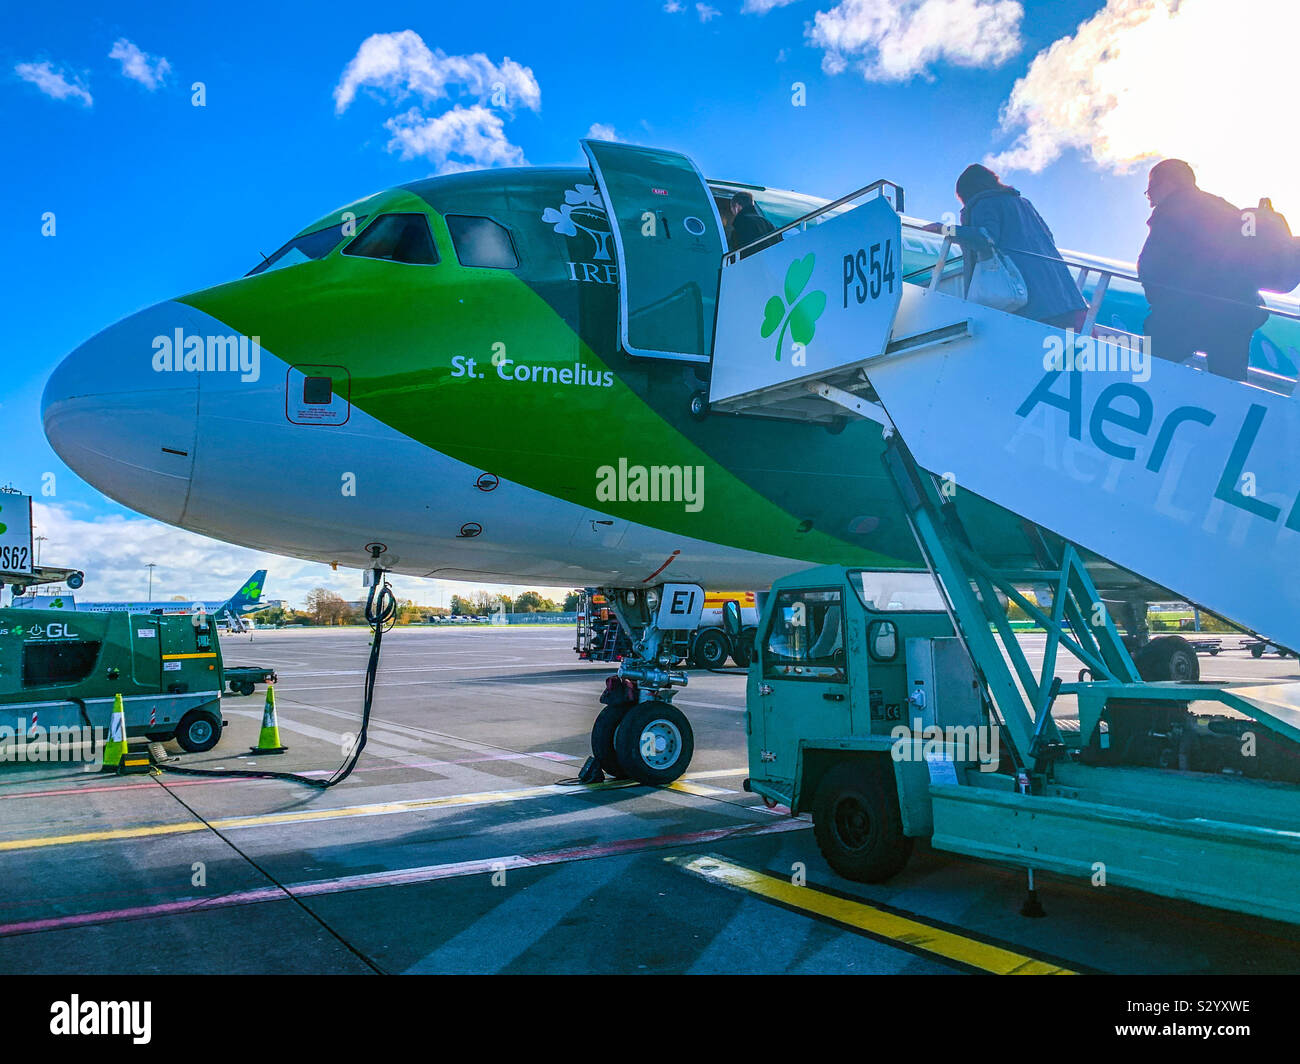 Embarking an Aer Lingus airbus A320-214 with Irish Rugby Team Livery at Dublin airport Stock Photo